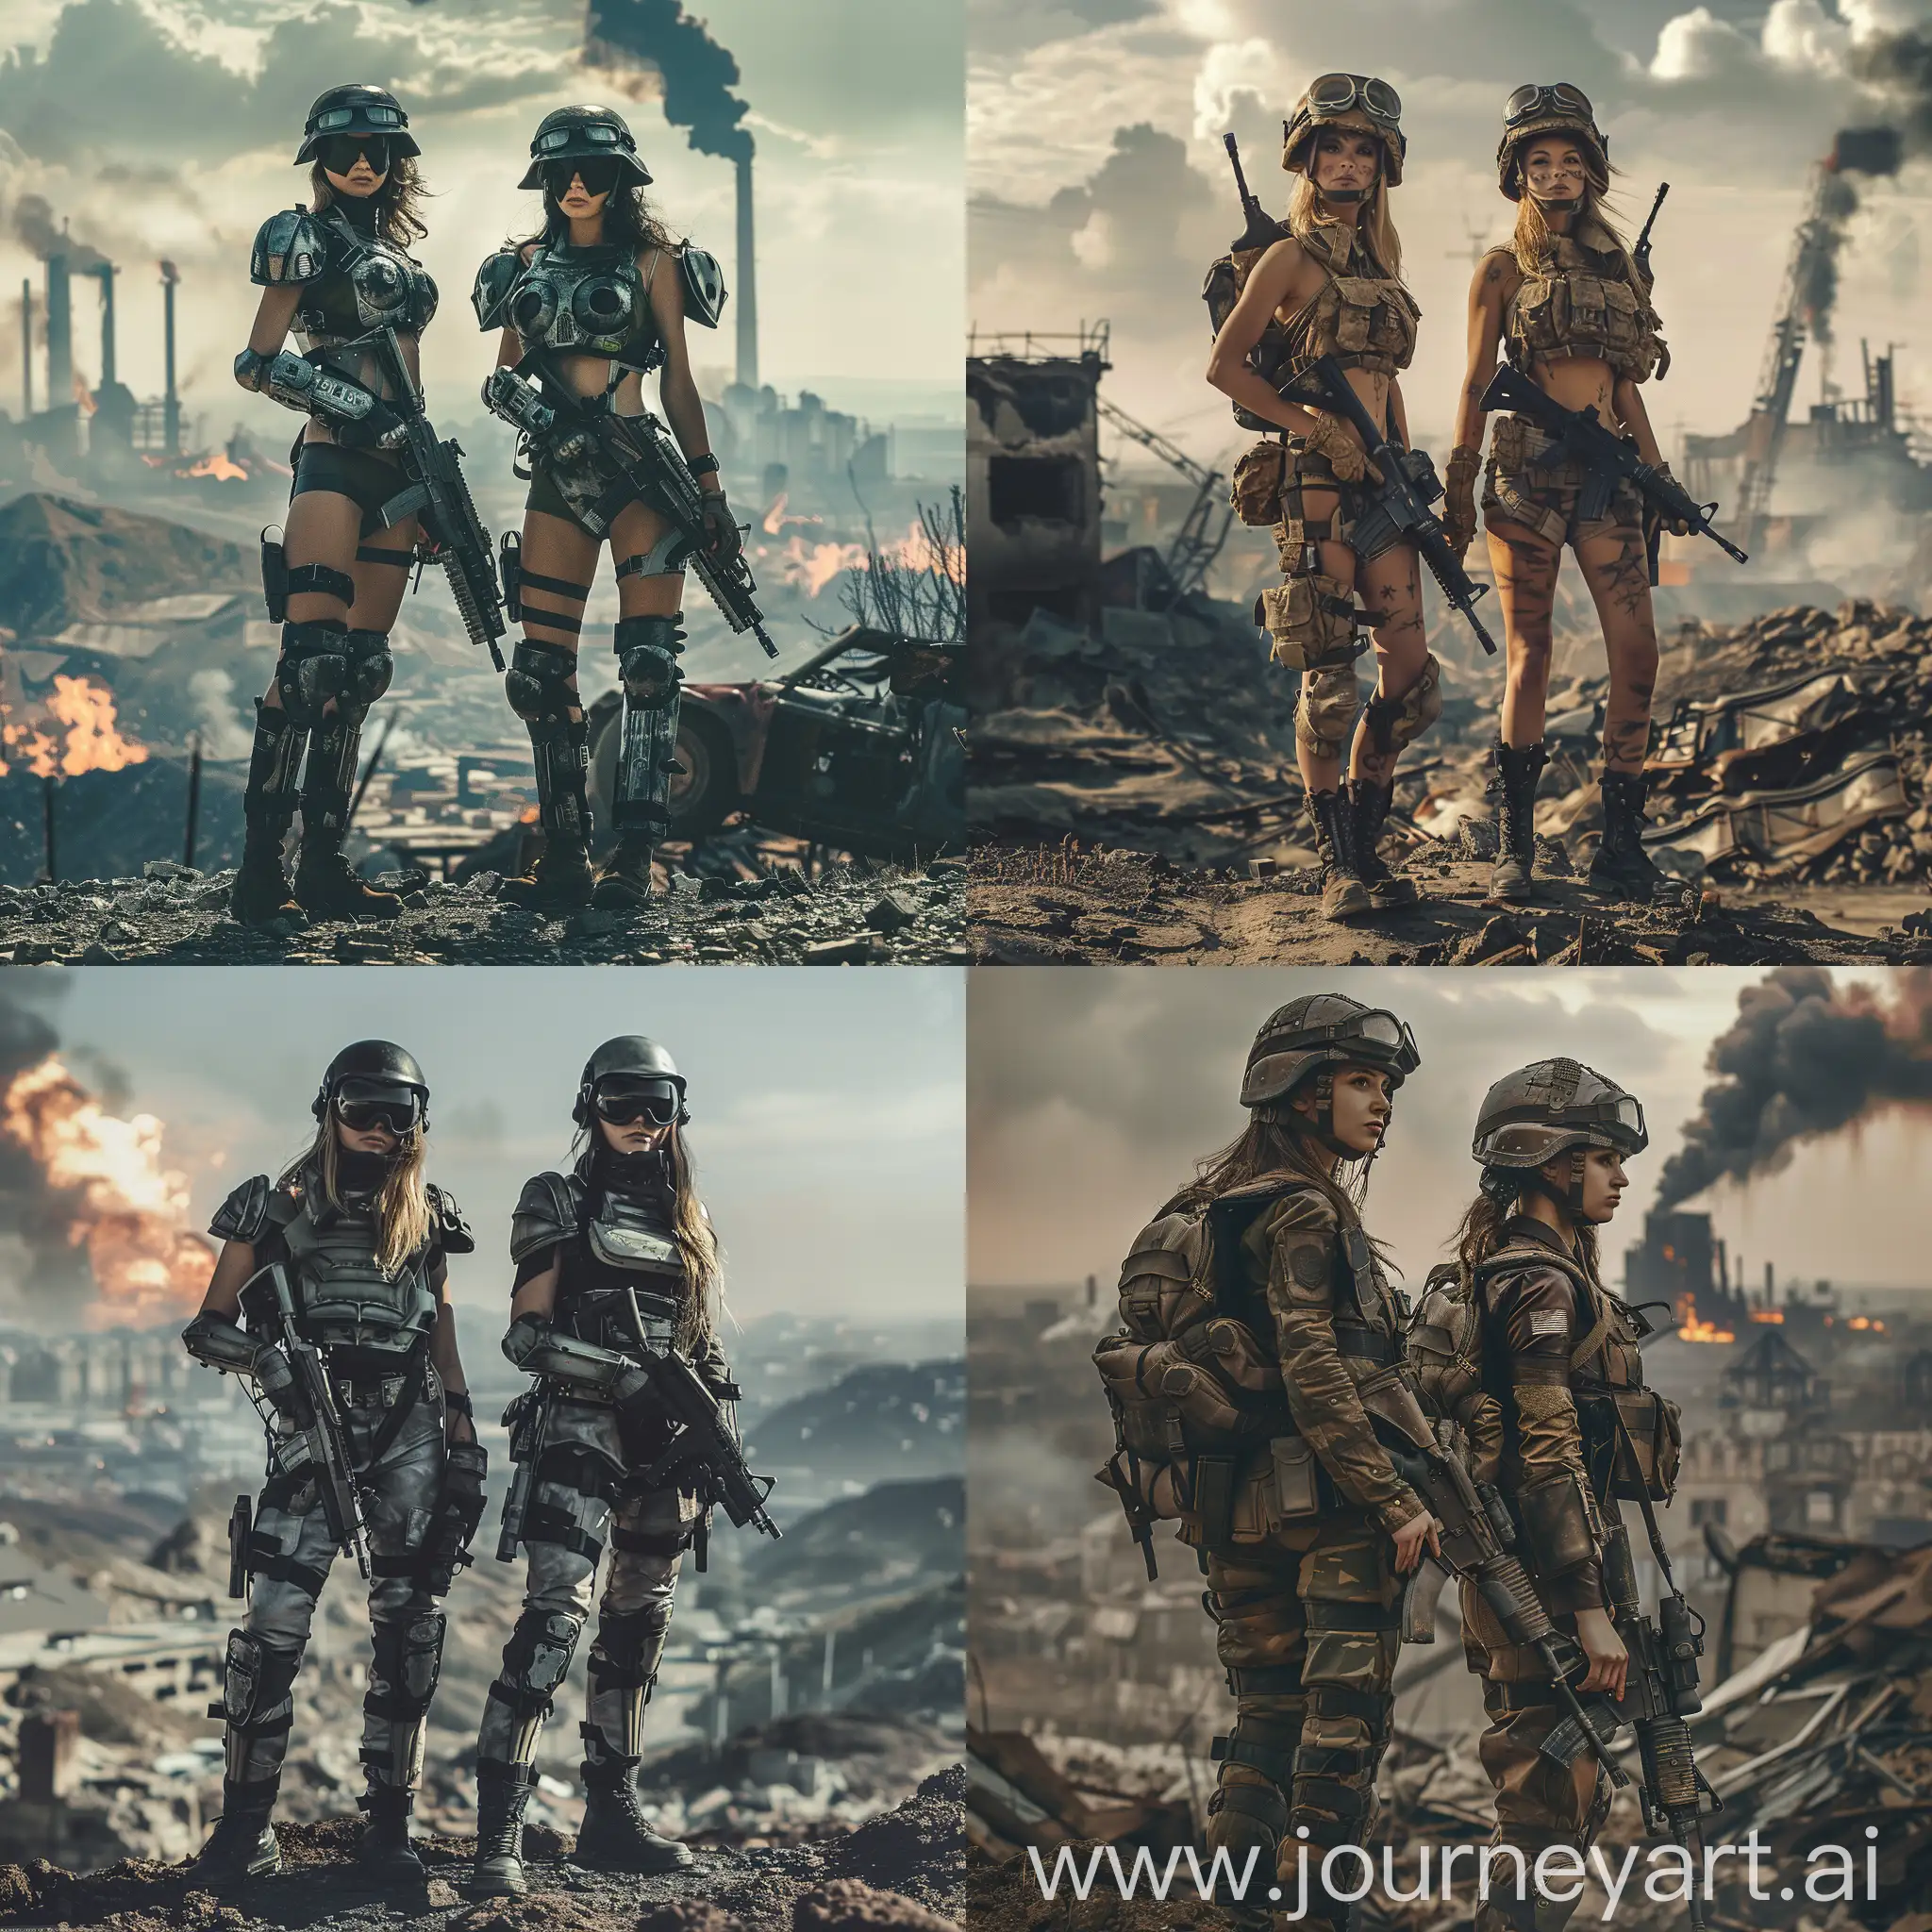 2 Beautiful young women in army exoskeletons and helmets with weapons in their hands pl. They stand on a hill, against the background of a destroyed burning city. Summer, . Soft, light: midday. Dieselpunk style. Camera Settings: Detailed Portrait Image, Canon 6D